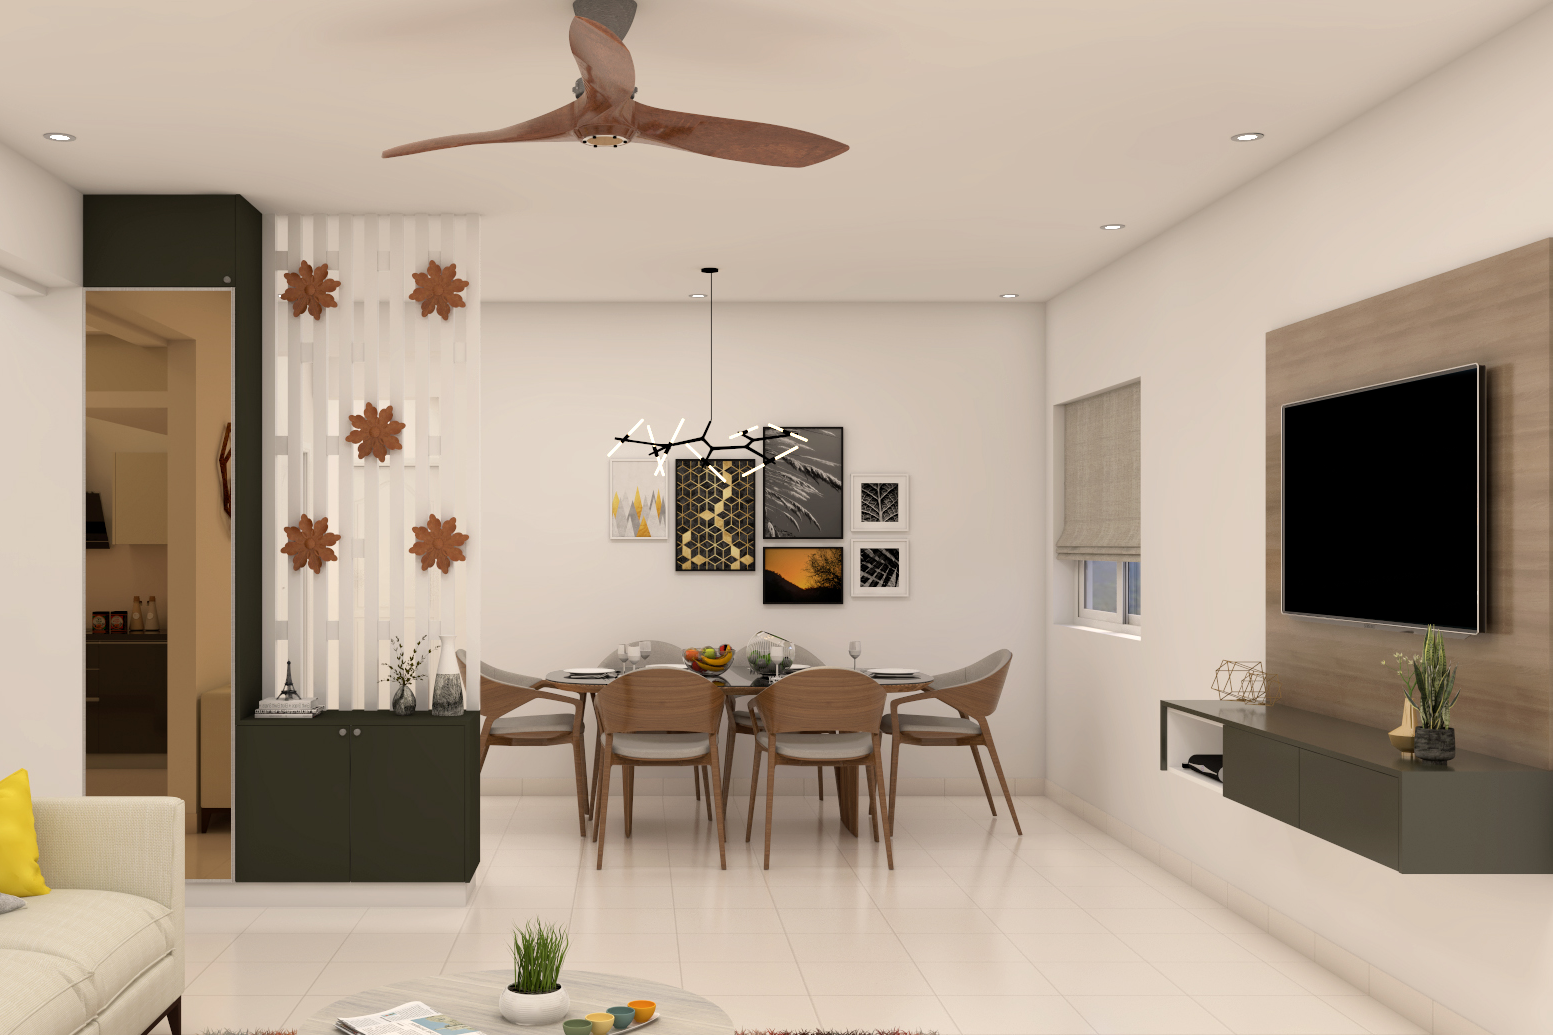 Modern 6-Seater Dining Room Design With Wooden Chairs